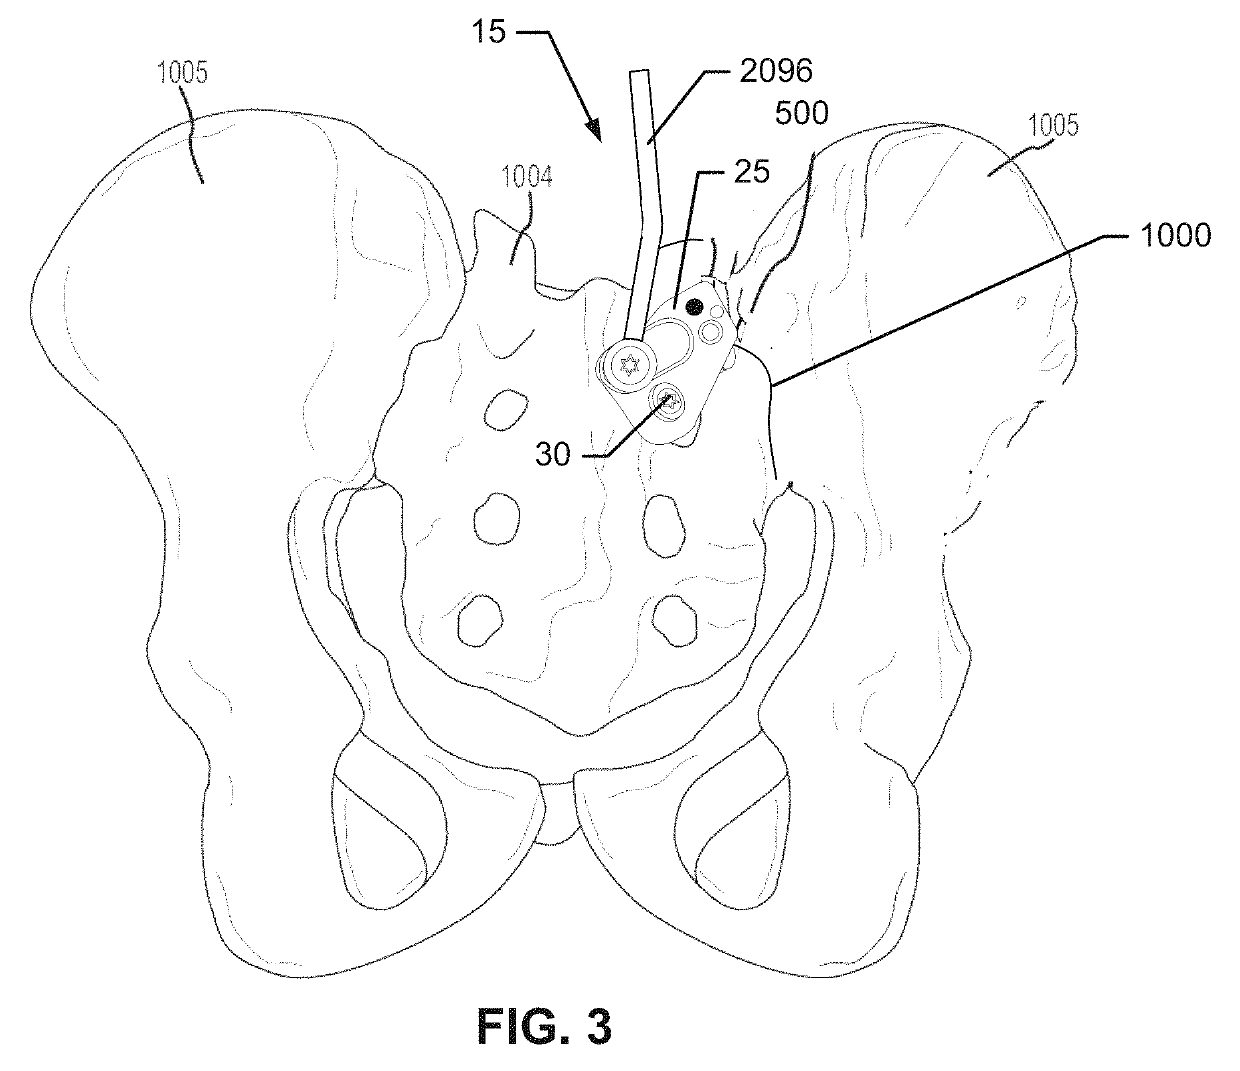 Systems and methods for fusing a sacroiliac joint and anchoring an orthopedic appliance